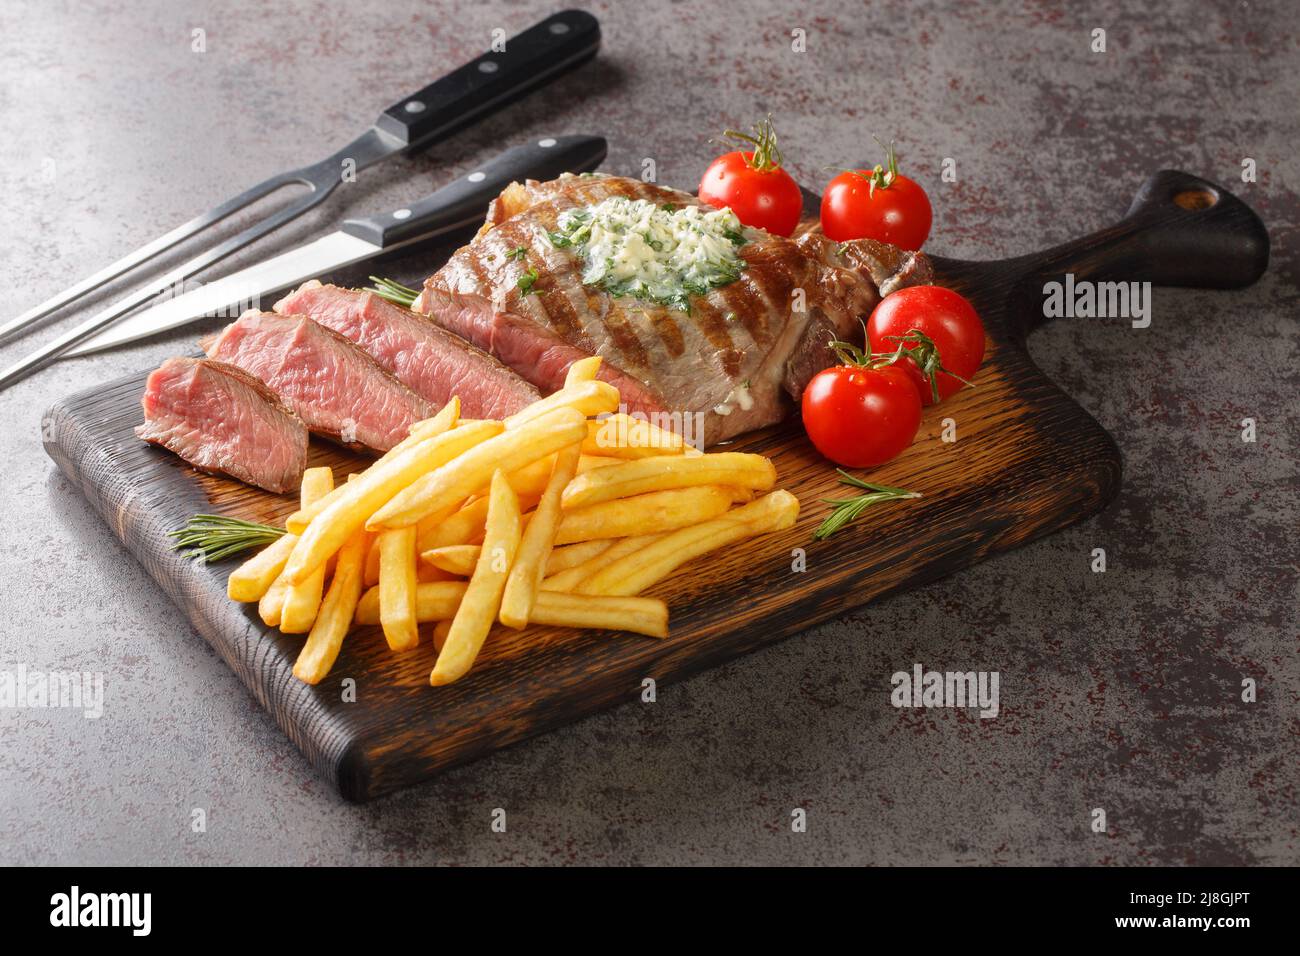 Grilled Ribeye Steak with French Fries, green butter and tomatoes closeup on the wooden board on the table. Horizontal Stock Photo